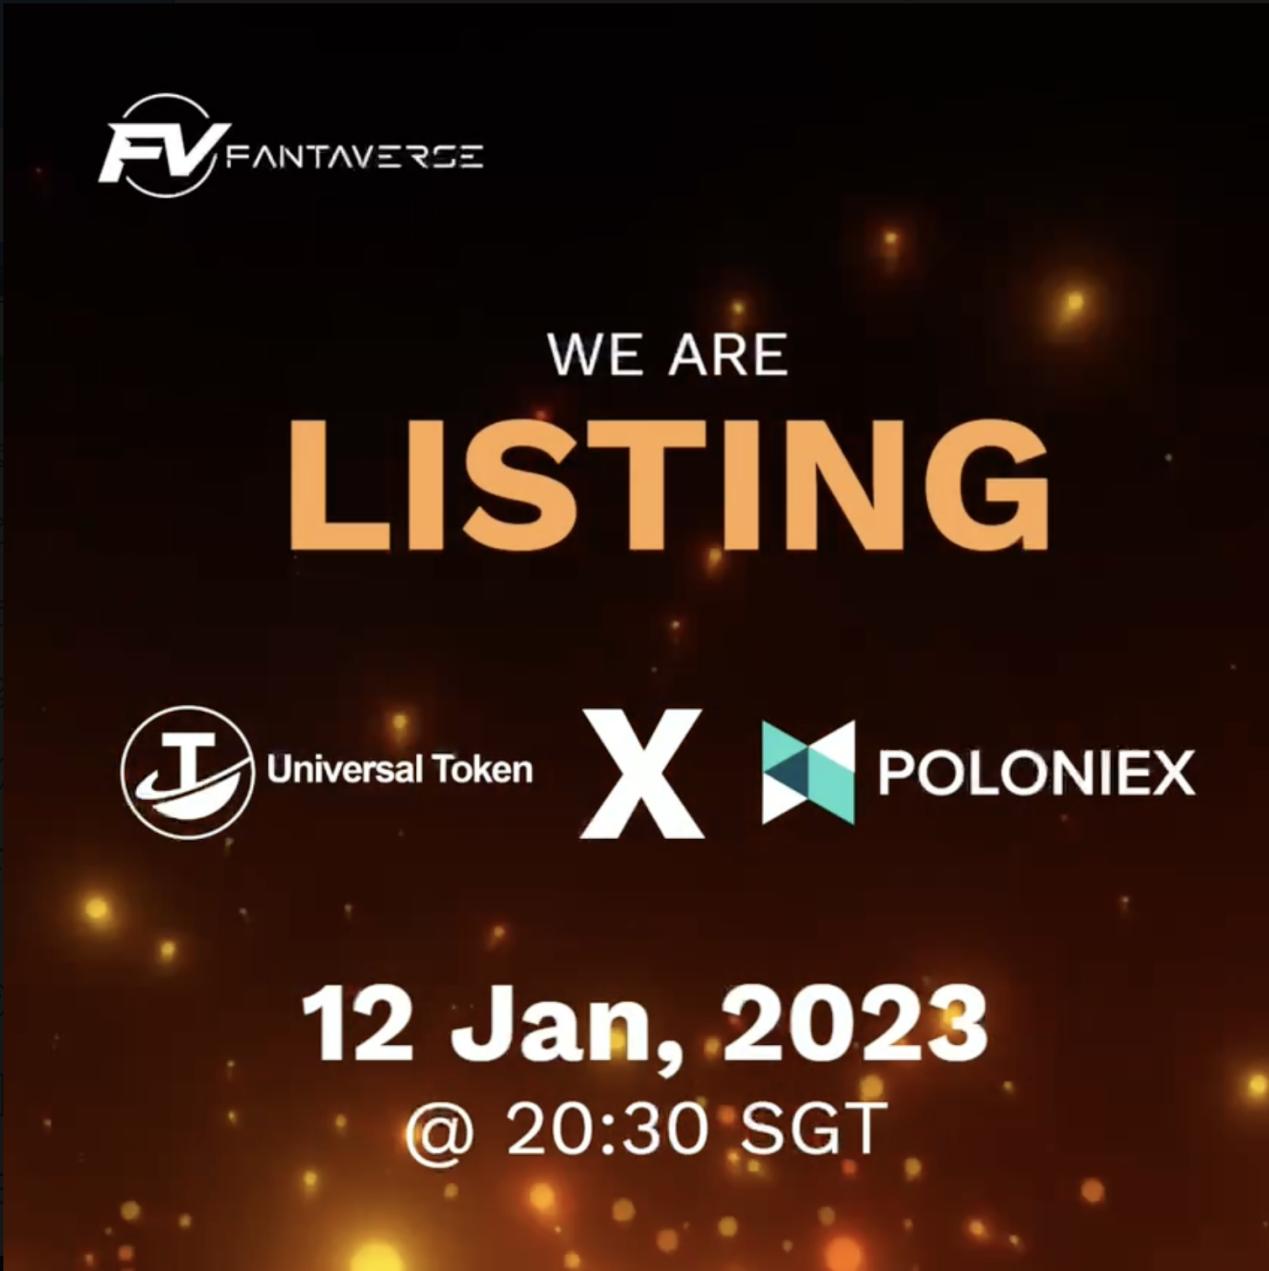 , FantaVerse UT is going live on cryptocurrency exchange Poloniex, making the first batch of WEB 3 metaverse